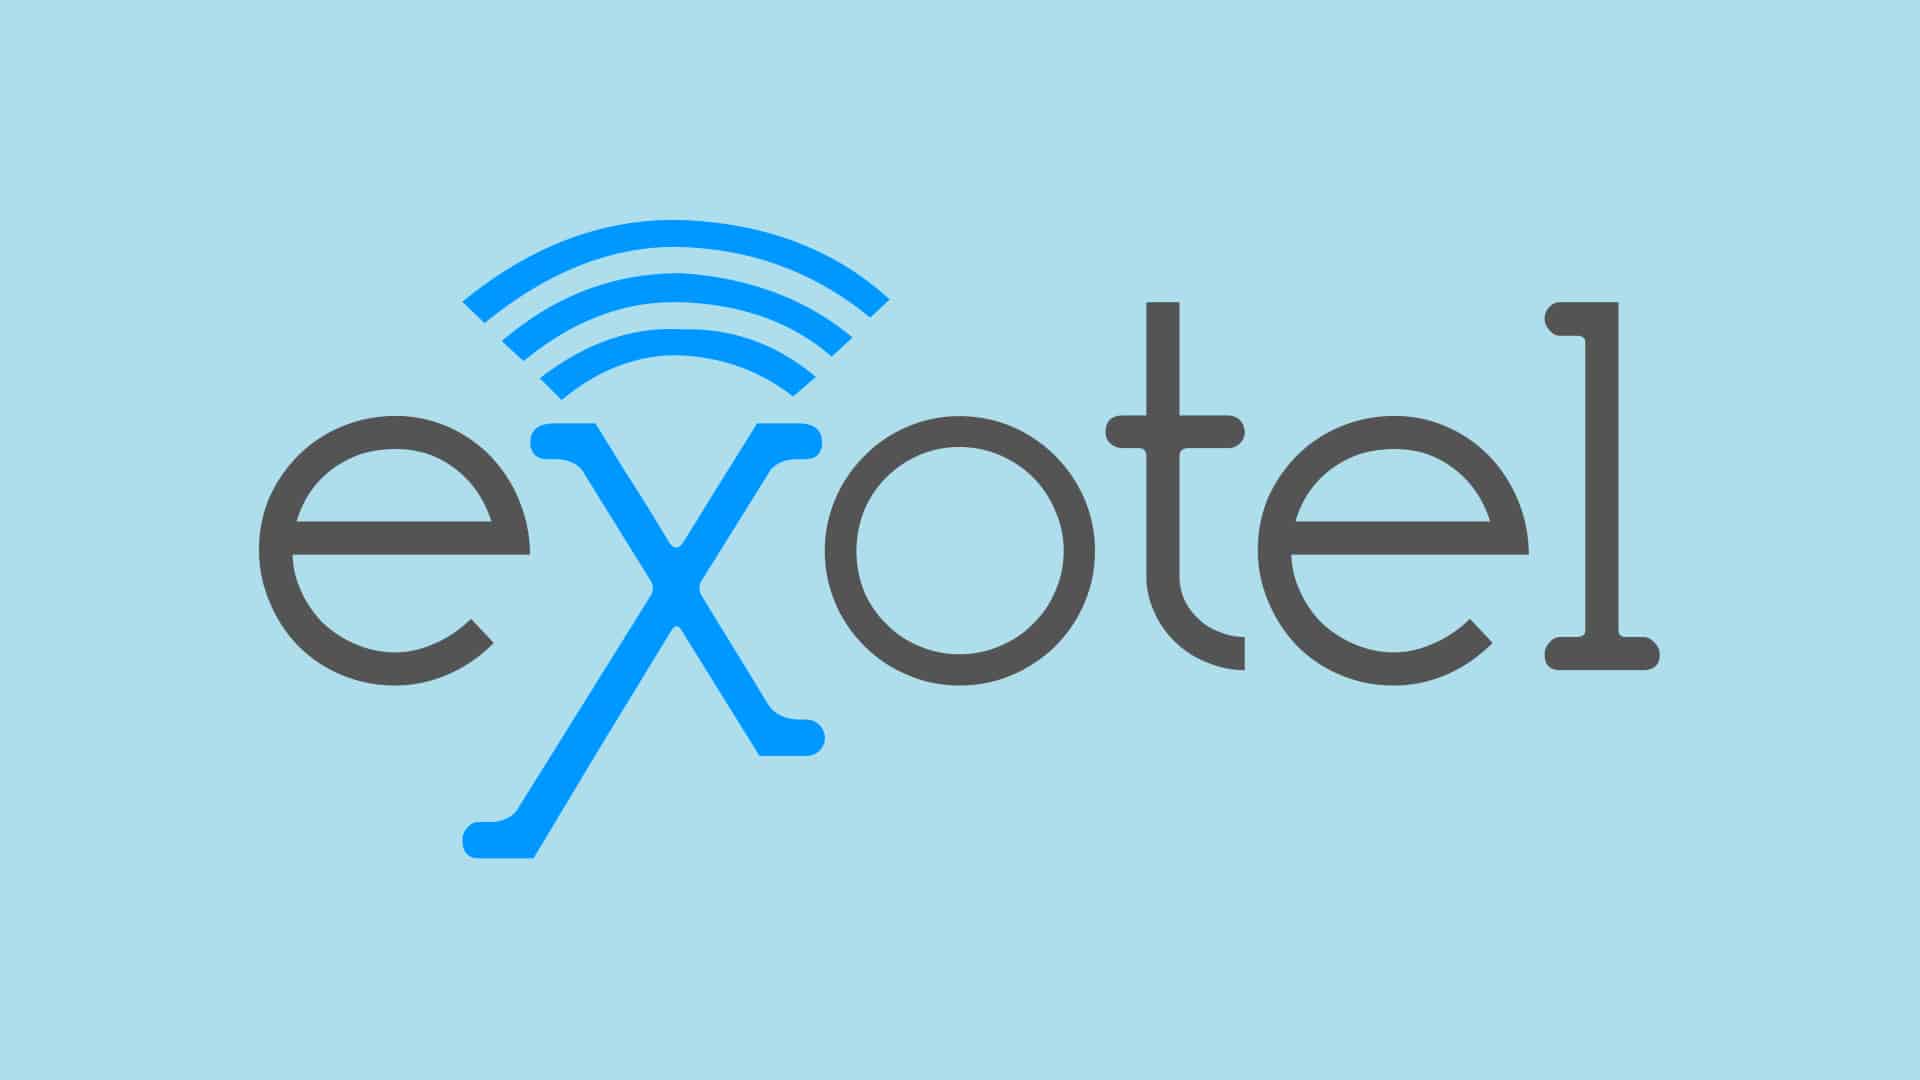 Exotel leverages cloud technology to support Covid relief efforts